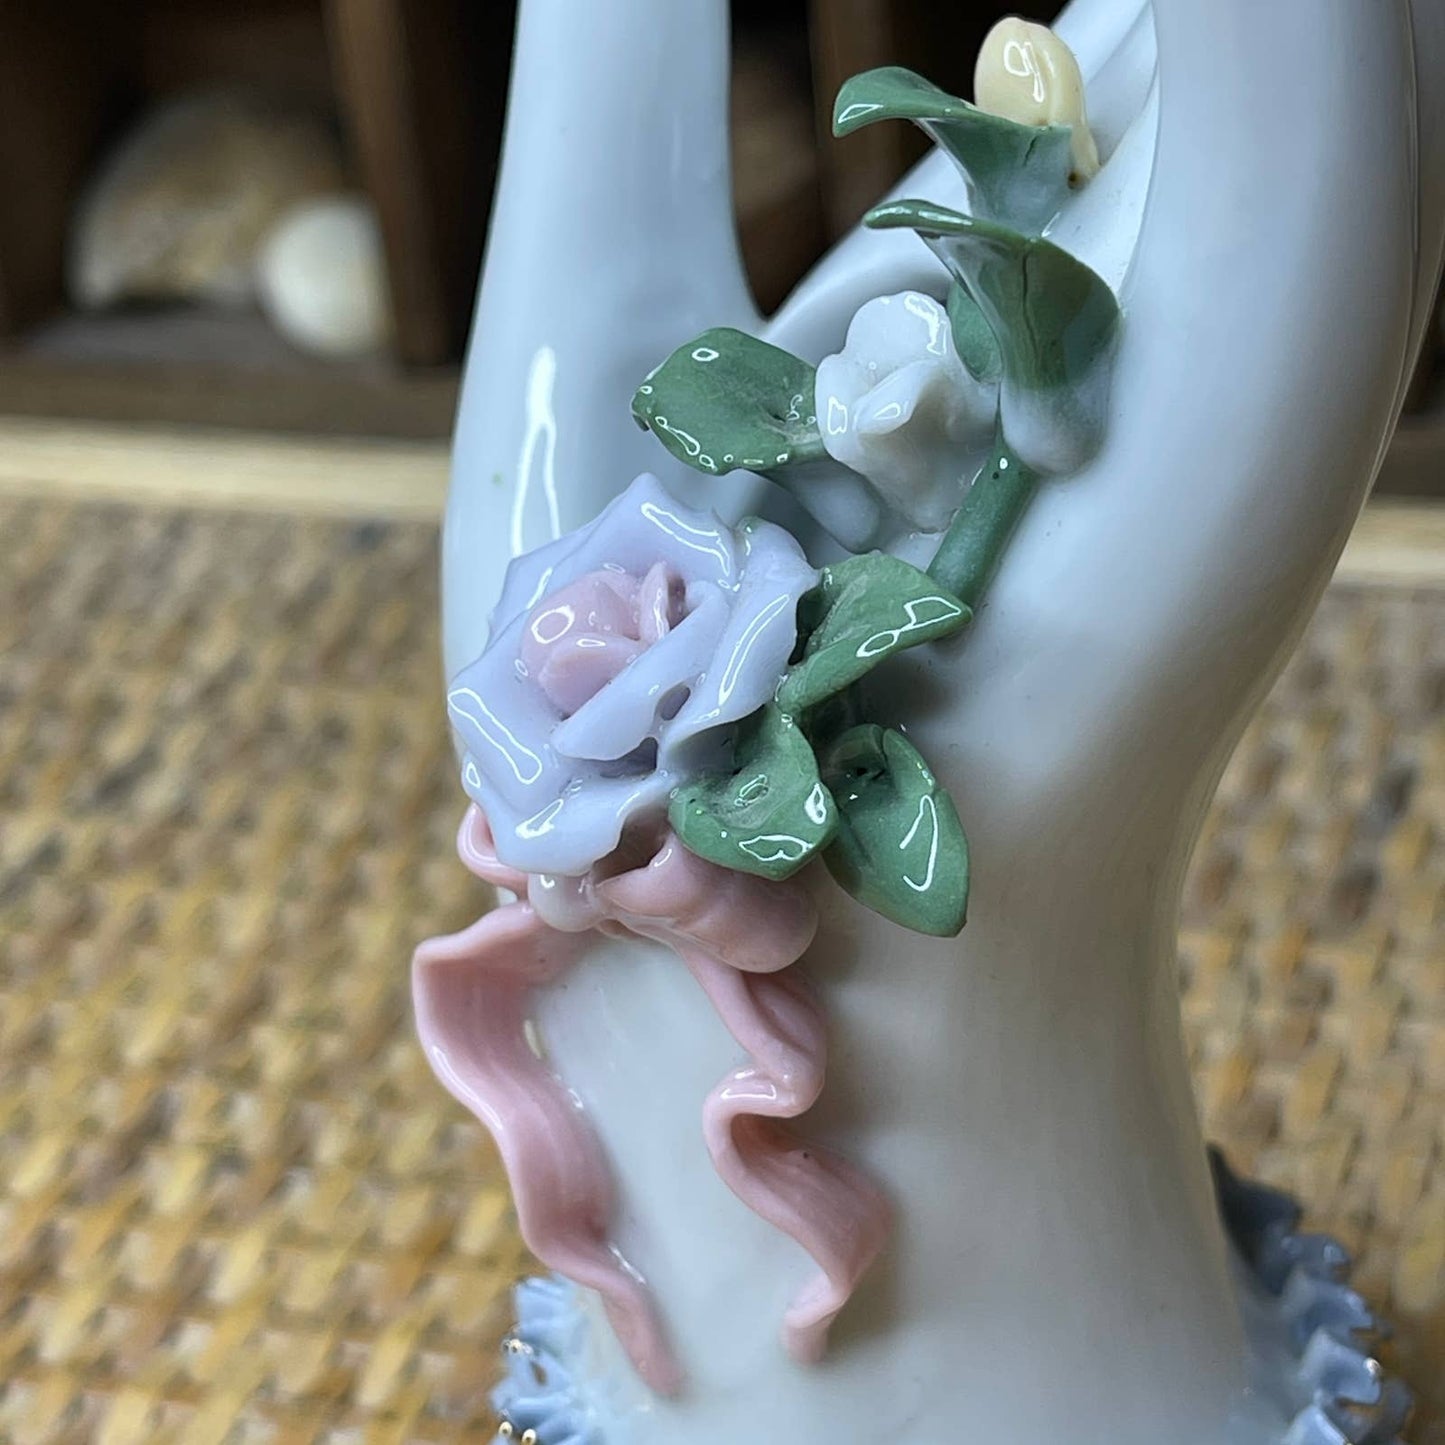 Vintage Porcelain Hand Vase Victorian Style Gold Nails Roses with Ruffle Cuff